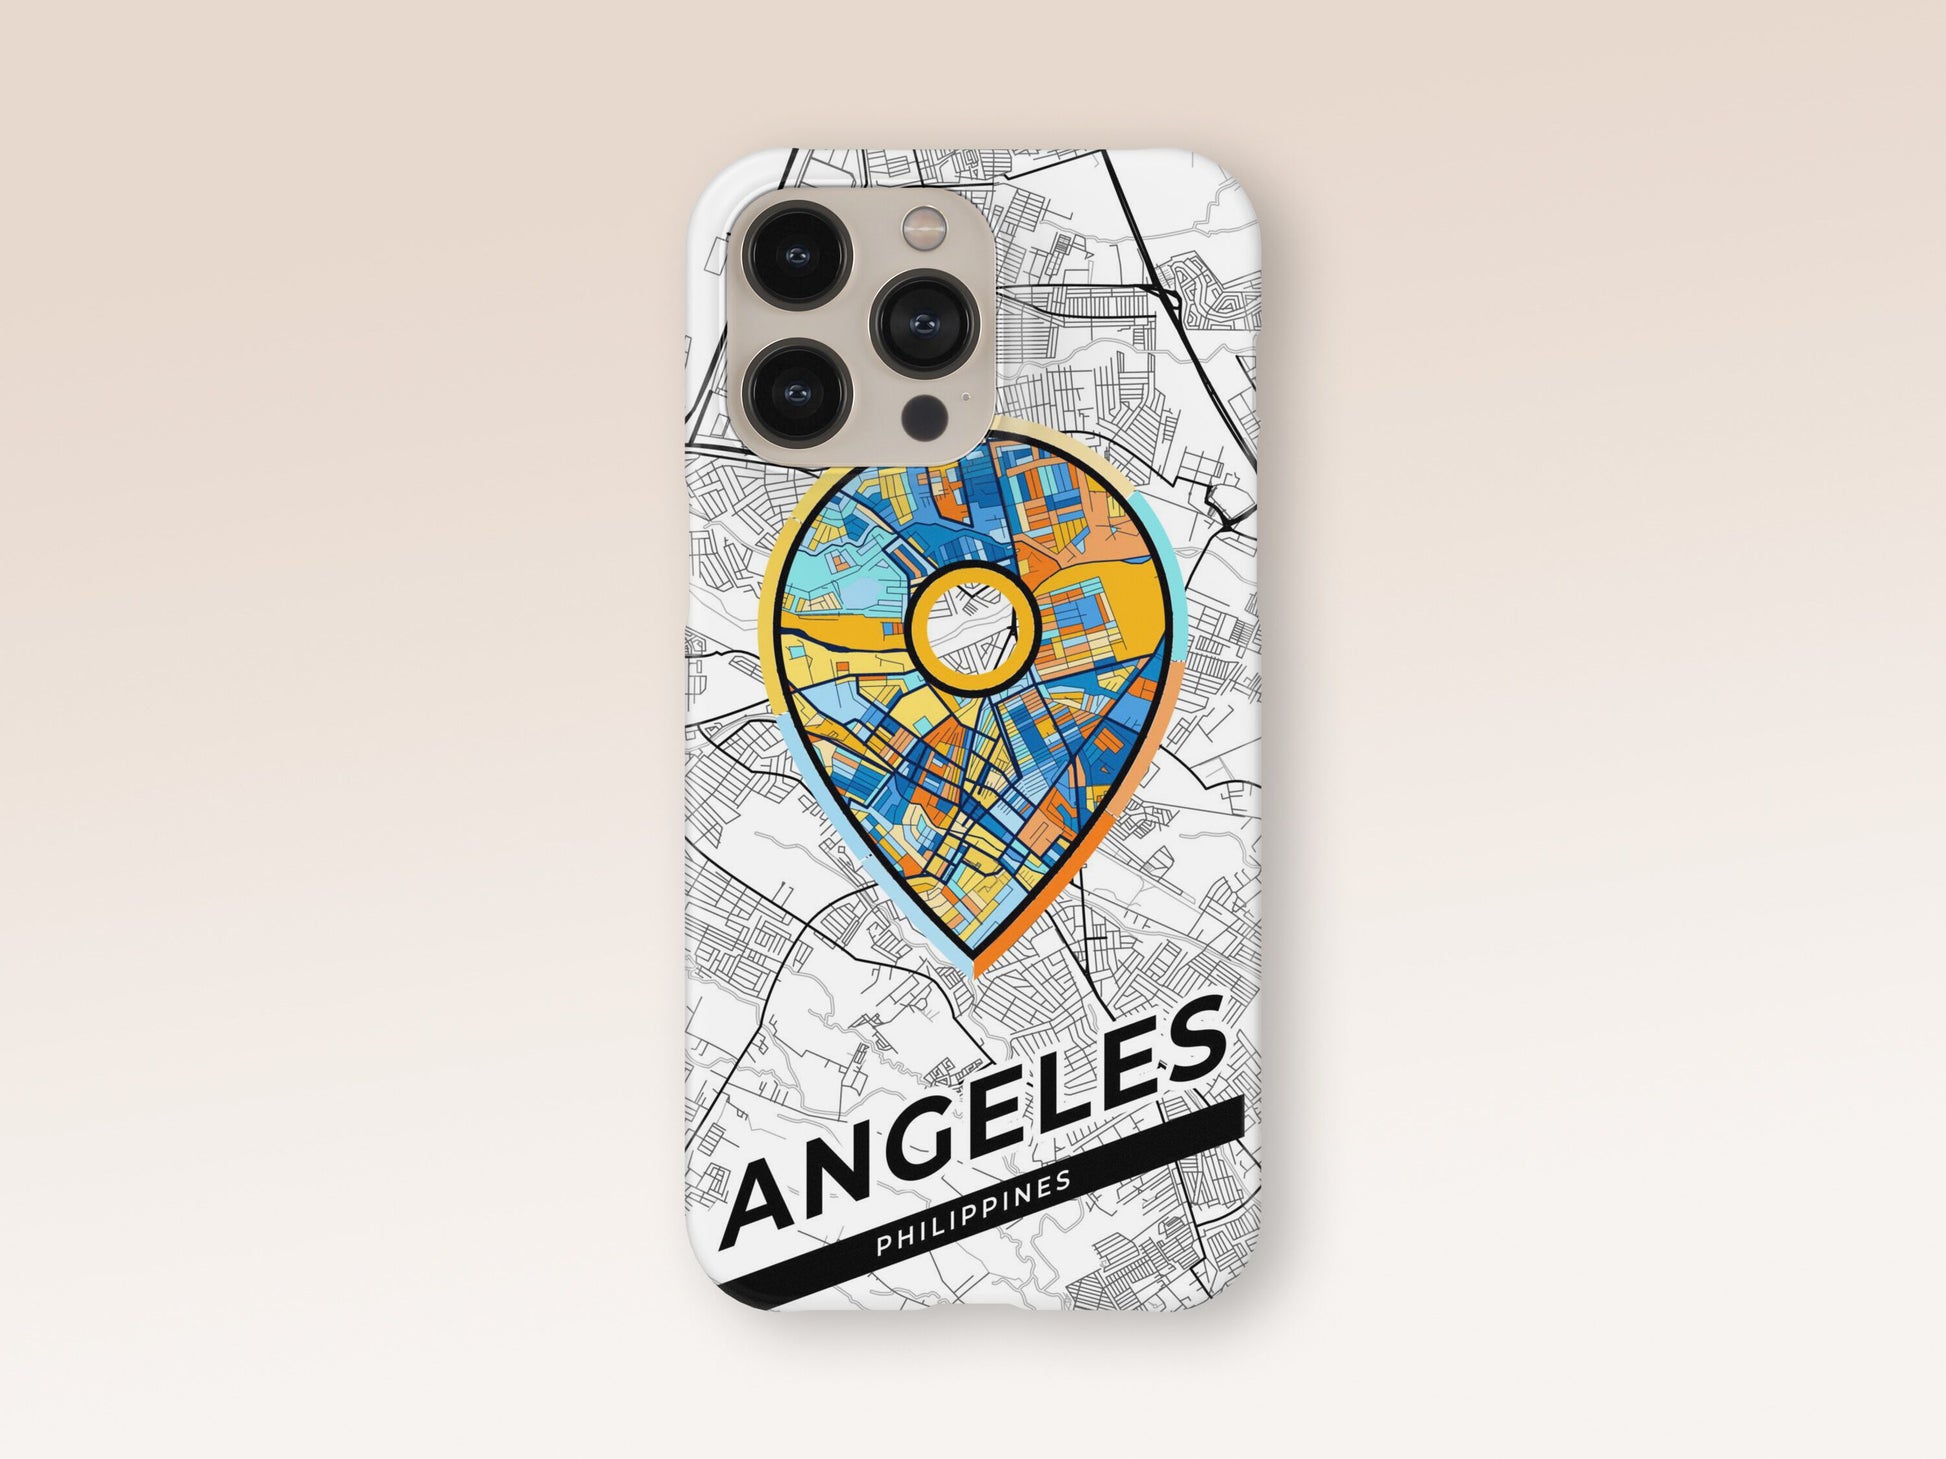 Angeles Philippines slim phone case with colorful icon. Birthday, wedding or housewarming gift. Couple match cases. 1